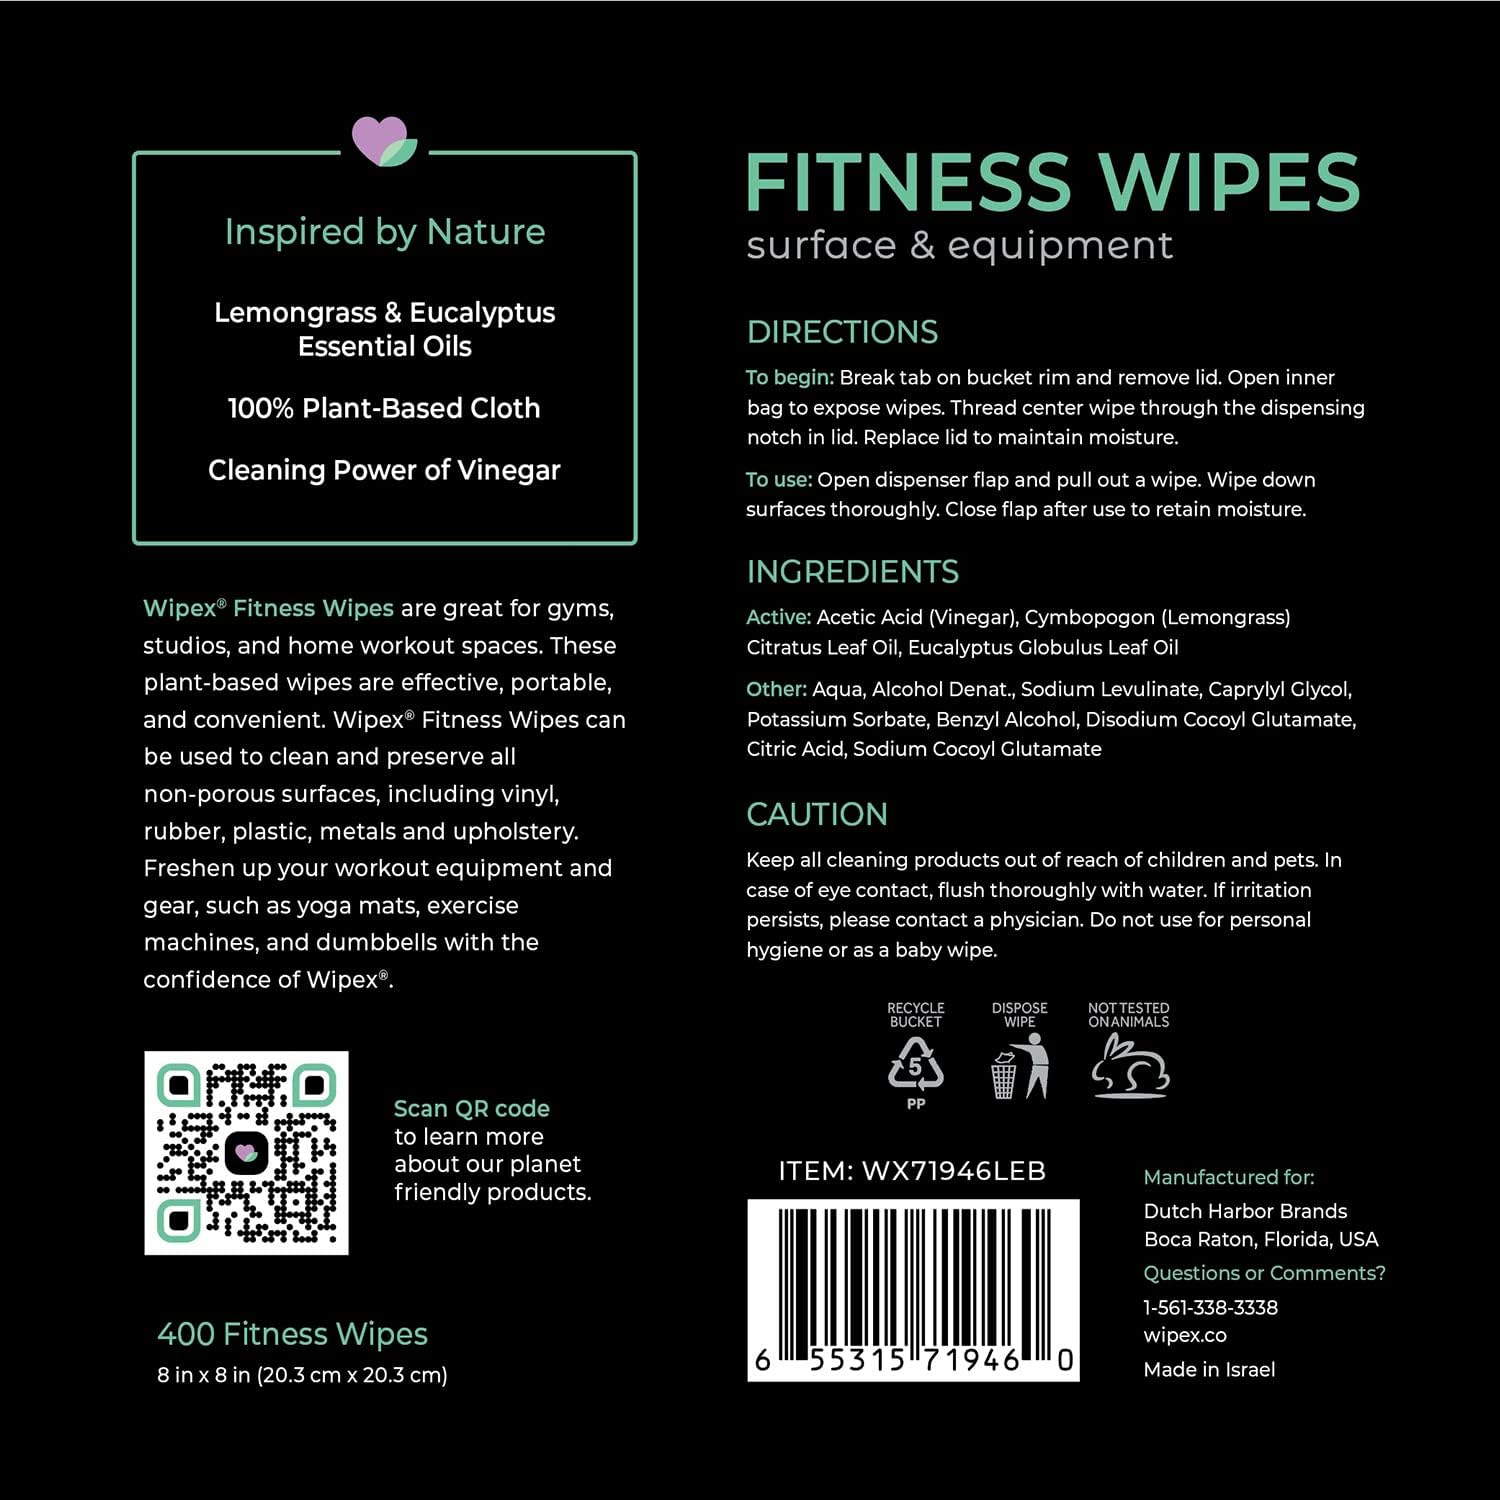 wipex gym wipes fitness equipment wipes review